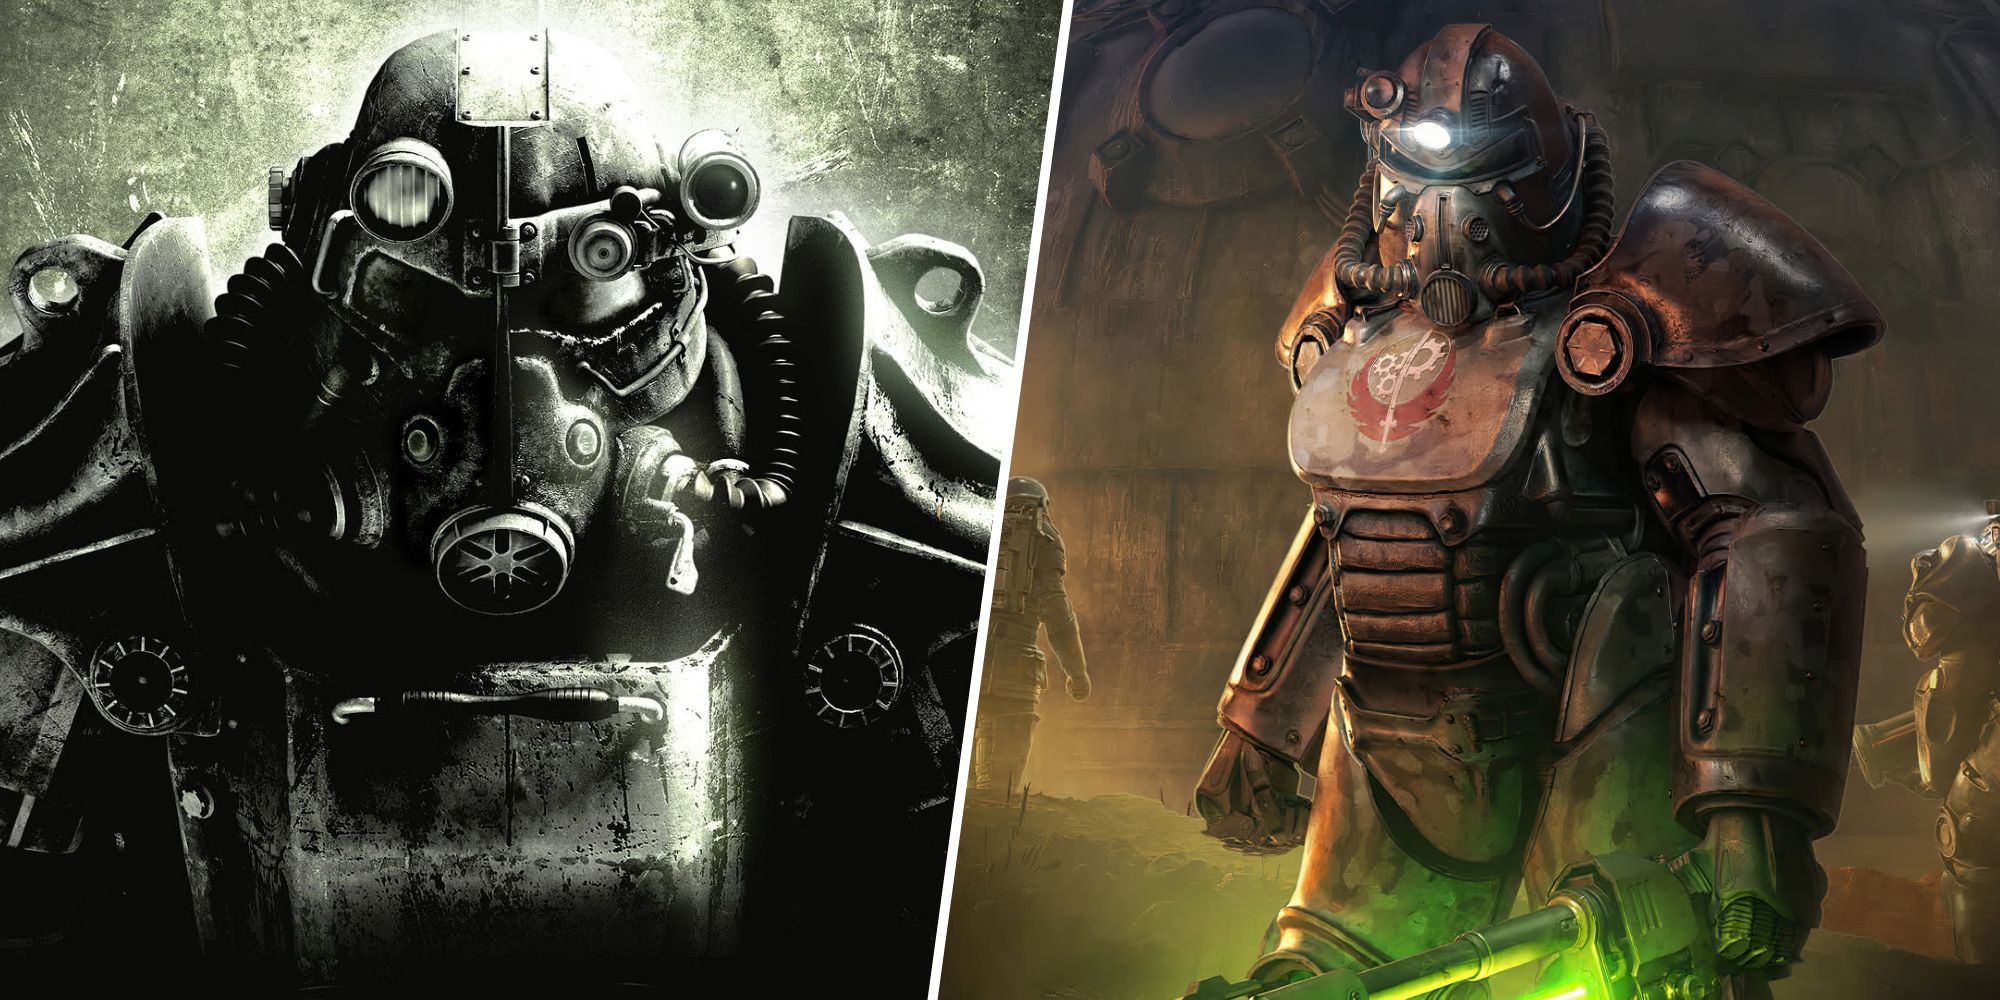 Power armor from Fallout 3 and power armor from Fallout 76